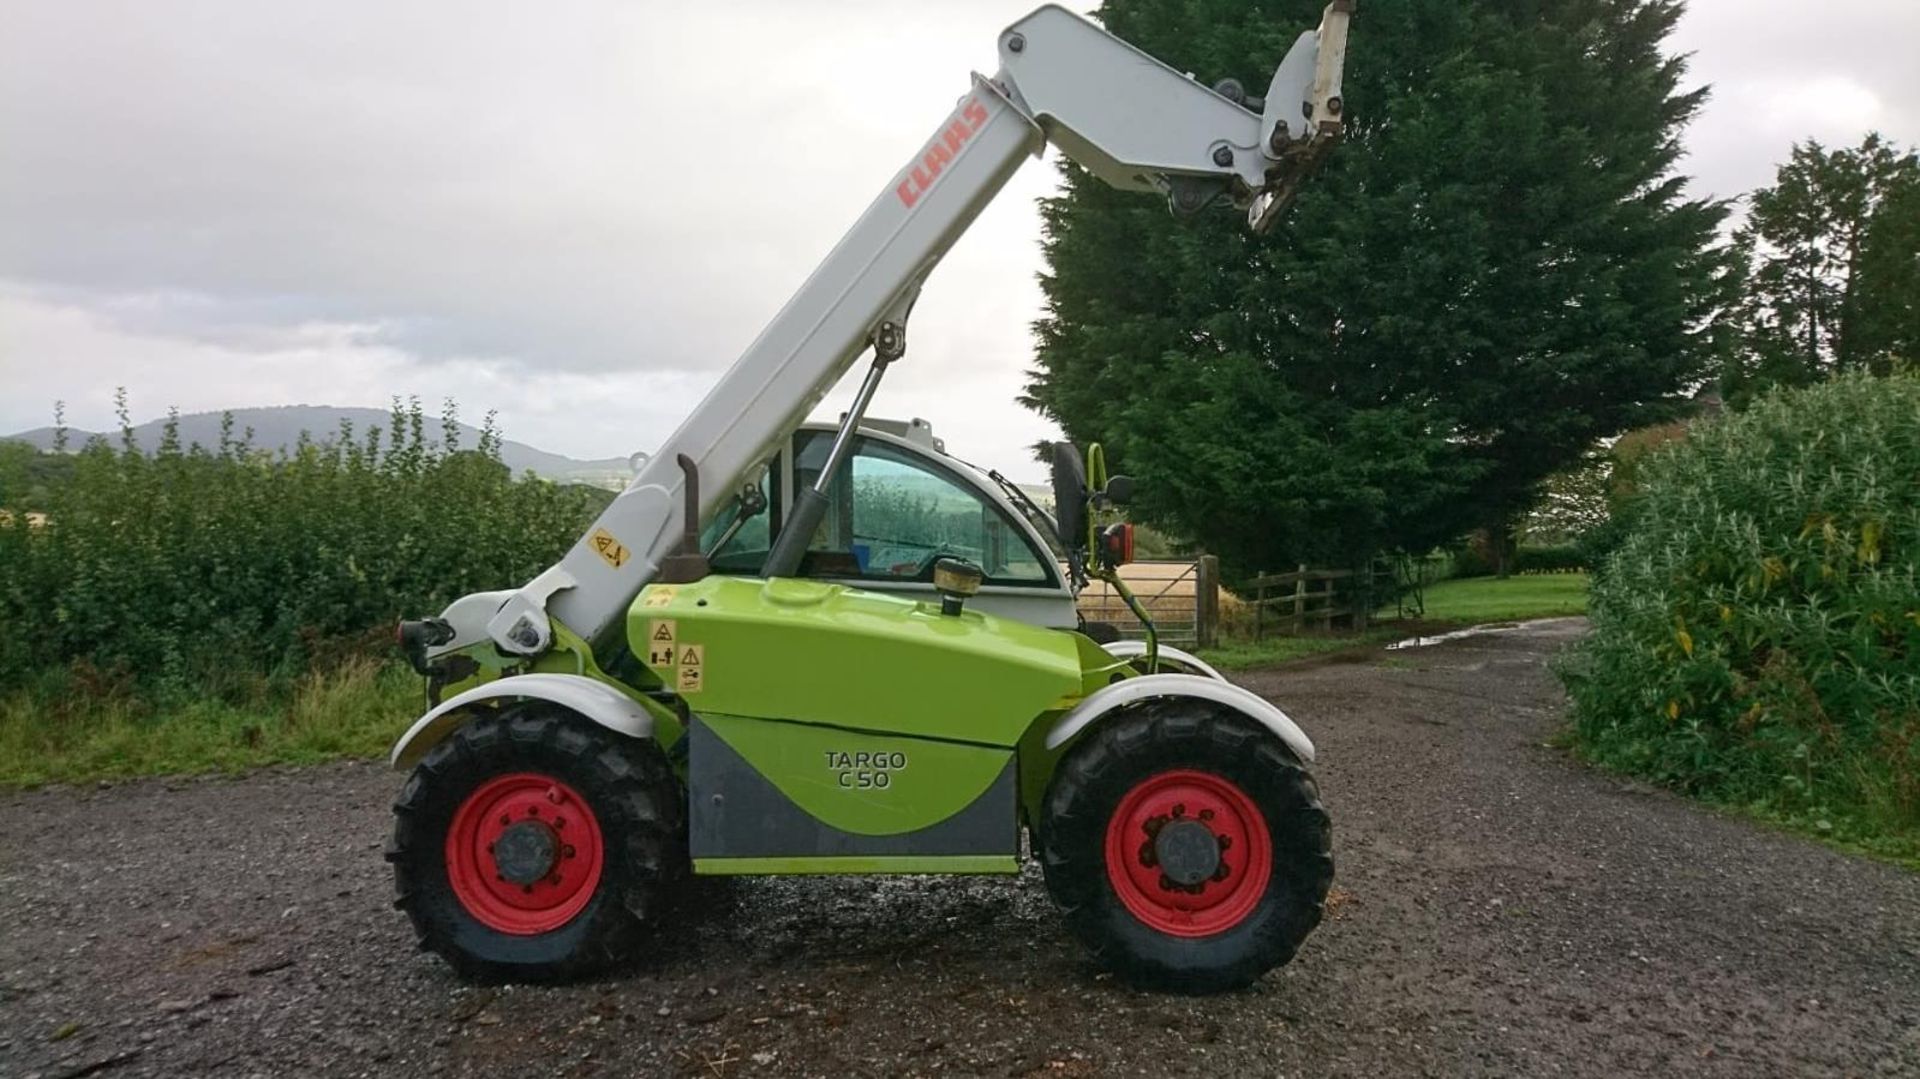 CLAAS TARGO C50 LOADER 8990 hrs (clock stopped recently) DX54 XPO - Bild 5 aus 7